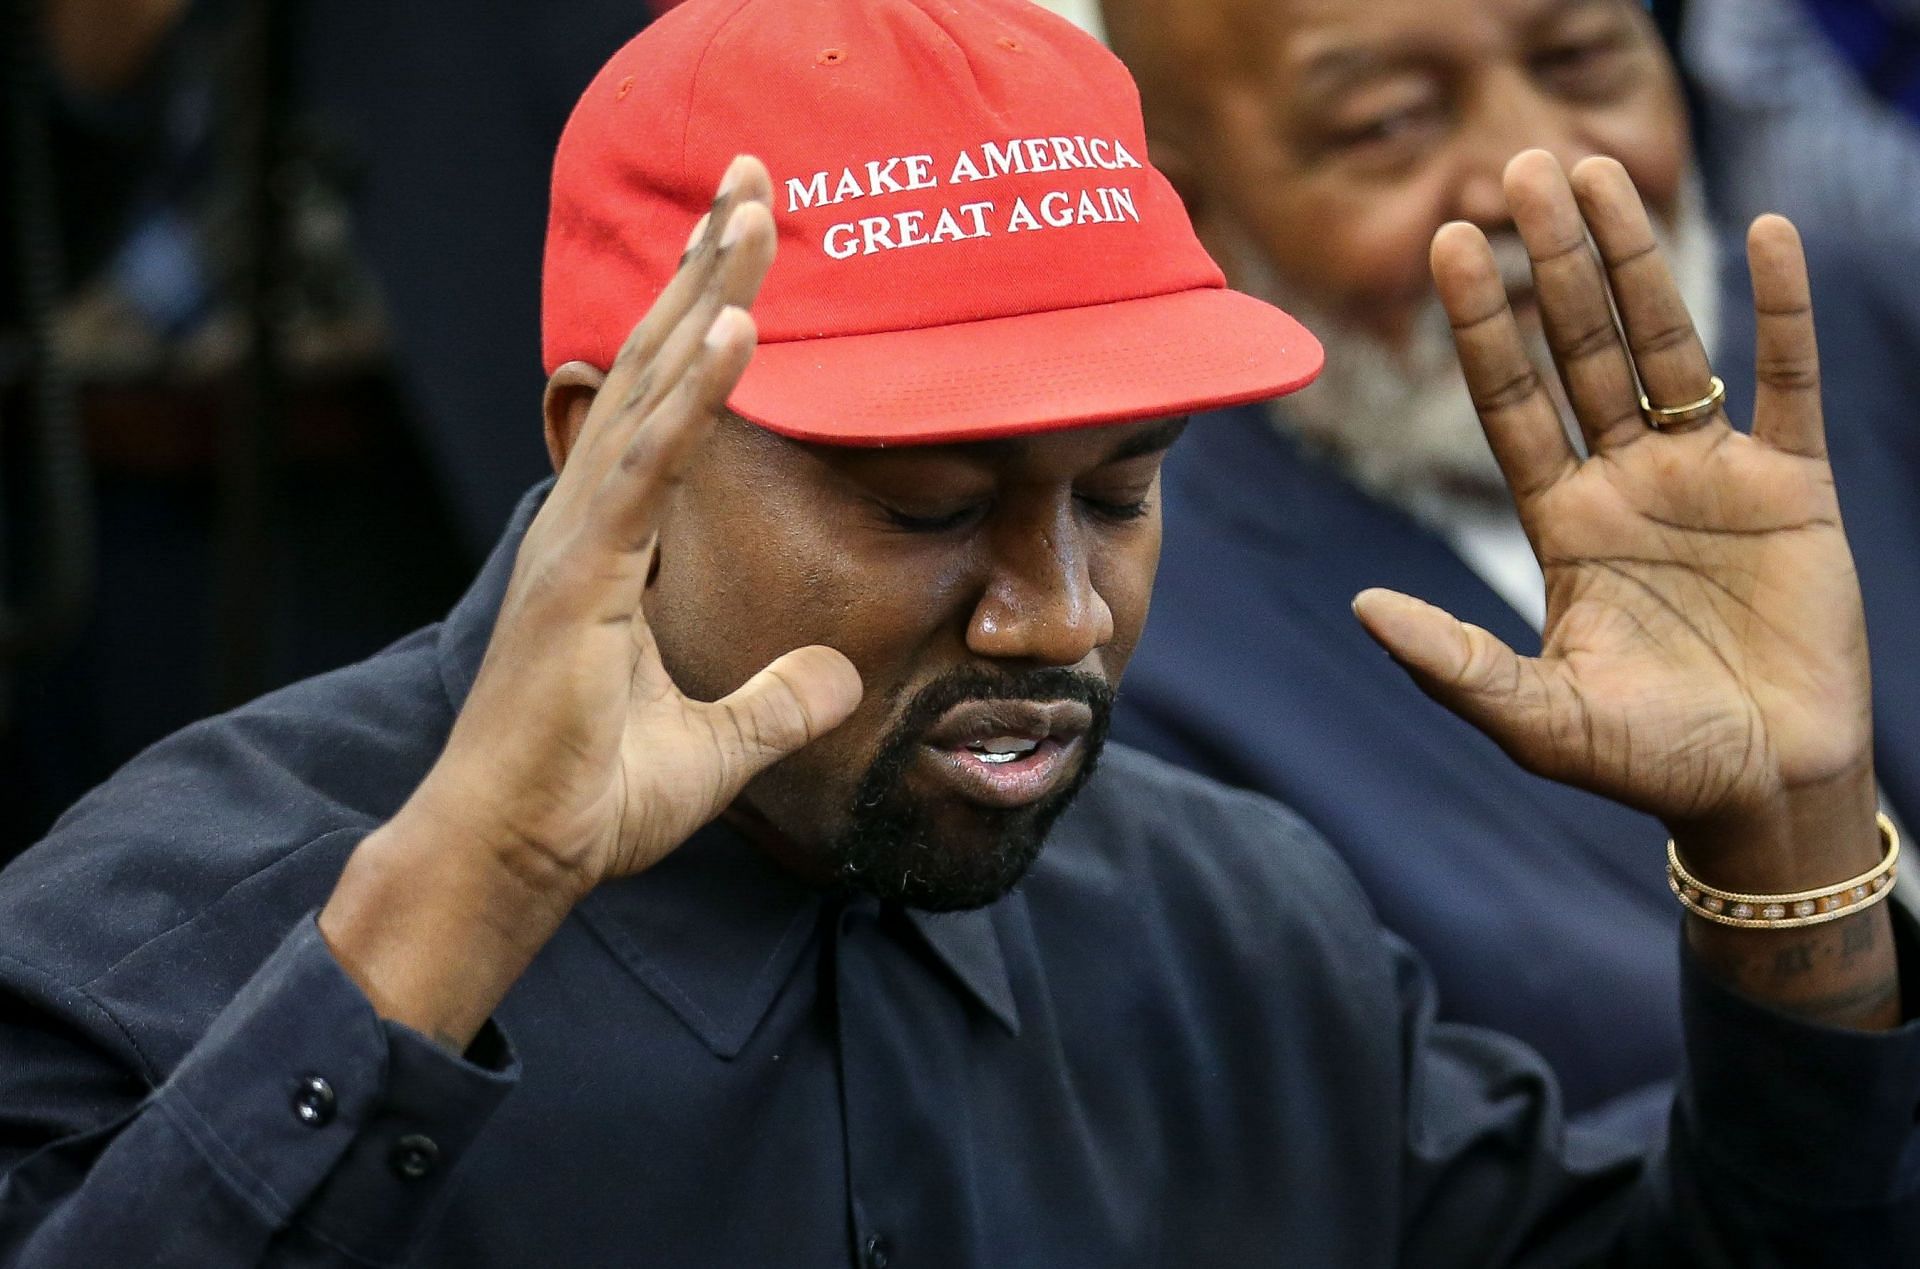 West ran for the 2020 US Presidency elections, but did not gather more than 10,000 votes. (Image via Kanye West/ Twitter)